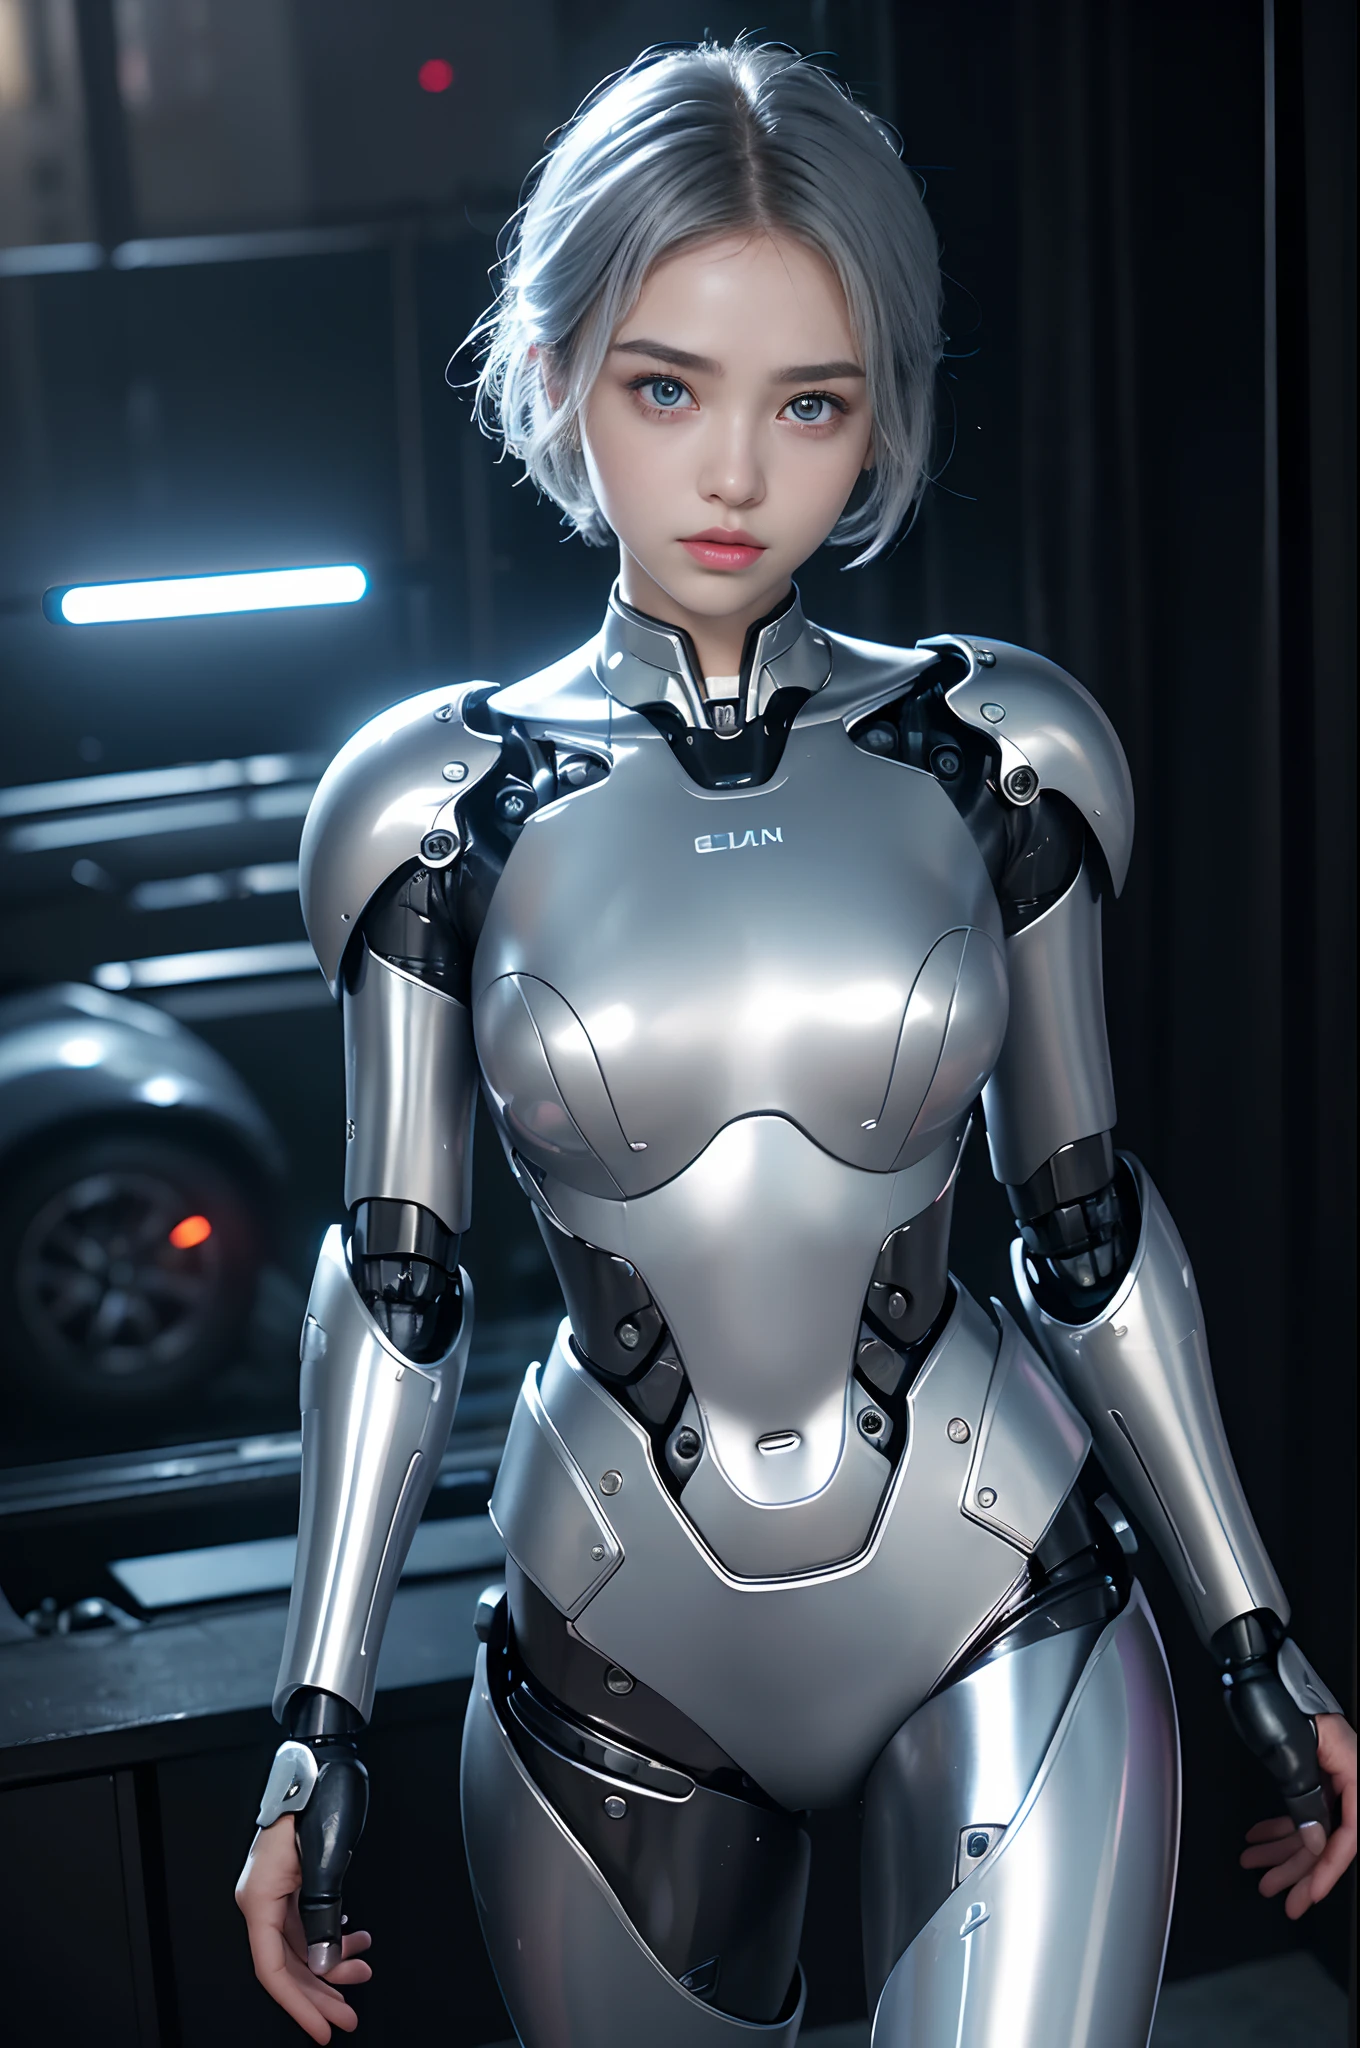 the best ever、8K,(((full body Esbian)))、(((The sheen)))、(((metalic)))、(((Very glossy mirror surface、Very hard armor)))、(((cyberpunked)))、The cute beauty of the mecha(Best Quality, Detailed details, masutepiece, , 8K, Chiaroscuro，Very shapely huge、Bust photos are ultra-realistic and realistic, Highly detailed Nikon videography )、((Beautiful and shining natural eyes))、Beautiful navel、Human skin type、（(Highly photorealistic human beings))、(Perfectly round pupils)、The details of the iris of the pupil are very amazing、(((Shining eyes)))、accurate fingers、Limbs without breakdowns、(((Caucasian 14 year old girl)))、((Very fair skin,,,,,,,,,,,,,,))、(((Details of the skin of one Caucasian girl)))、Naturally closed mouth、Natural areola、natural 、Staring eyes、Natural body、a baby face、Feminine face、Feminine body、(with round face)、a small face、soft cheeks、Looking at the camera、full body Esbian、、Beautiful and shining natural eyes、Human skin type、（(Highly photorealistic human beings))、(Perfectly round pupils)、The details of the iris of the pupil are very amazing、Limbs without breakdowns、Naturally closed mouth、Natural areola、natural 、Staring eyes、Natural body、Slightly baby-faced、Feminine face、Feminine body、with round face、a small face、soft cheeks、Looking at the camera、full body Esbian、Balanced face、drooing eyes、(((Not a crushing eye)))、Body with human-like proportions、(((Slightly longer arms)))、(rather long torso)、(((slightly larger hands)))、human face、(((Glowing blue light blue silver hair)))、(((Cool and cute short-cut hair)))、(((The background is the future)))、(((8 Head Body)))、(((Luminescent light purple eyes)))、(((Thin thin silver eyebrows)))、(((Thin eyebrows)))、Looking here、(Gentle double eyelids)、(((Gentle face)))、(((Background Mecha)))、bladerunner、(((RoboCop)))、Ghost in the Shell、tron、Space Detective Gavan、Swat、police officers、(((Night background)))、(((No makeup)))、(((Hollywood Science Fiction Movie Lighting))、(((New York in 5000 AD)))、(((Te（layer)))、Height 1cm、Leg length 80cm、